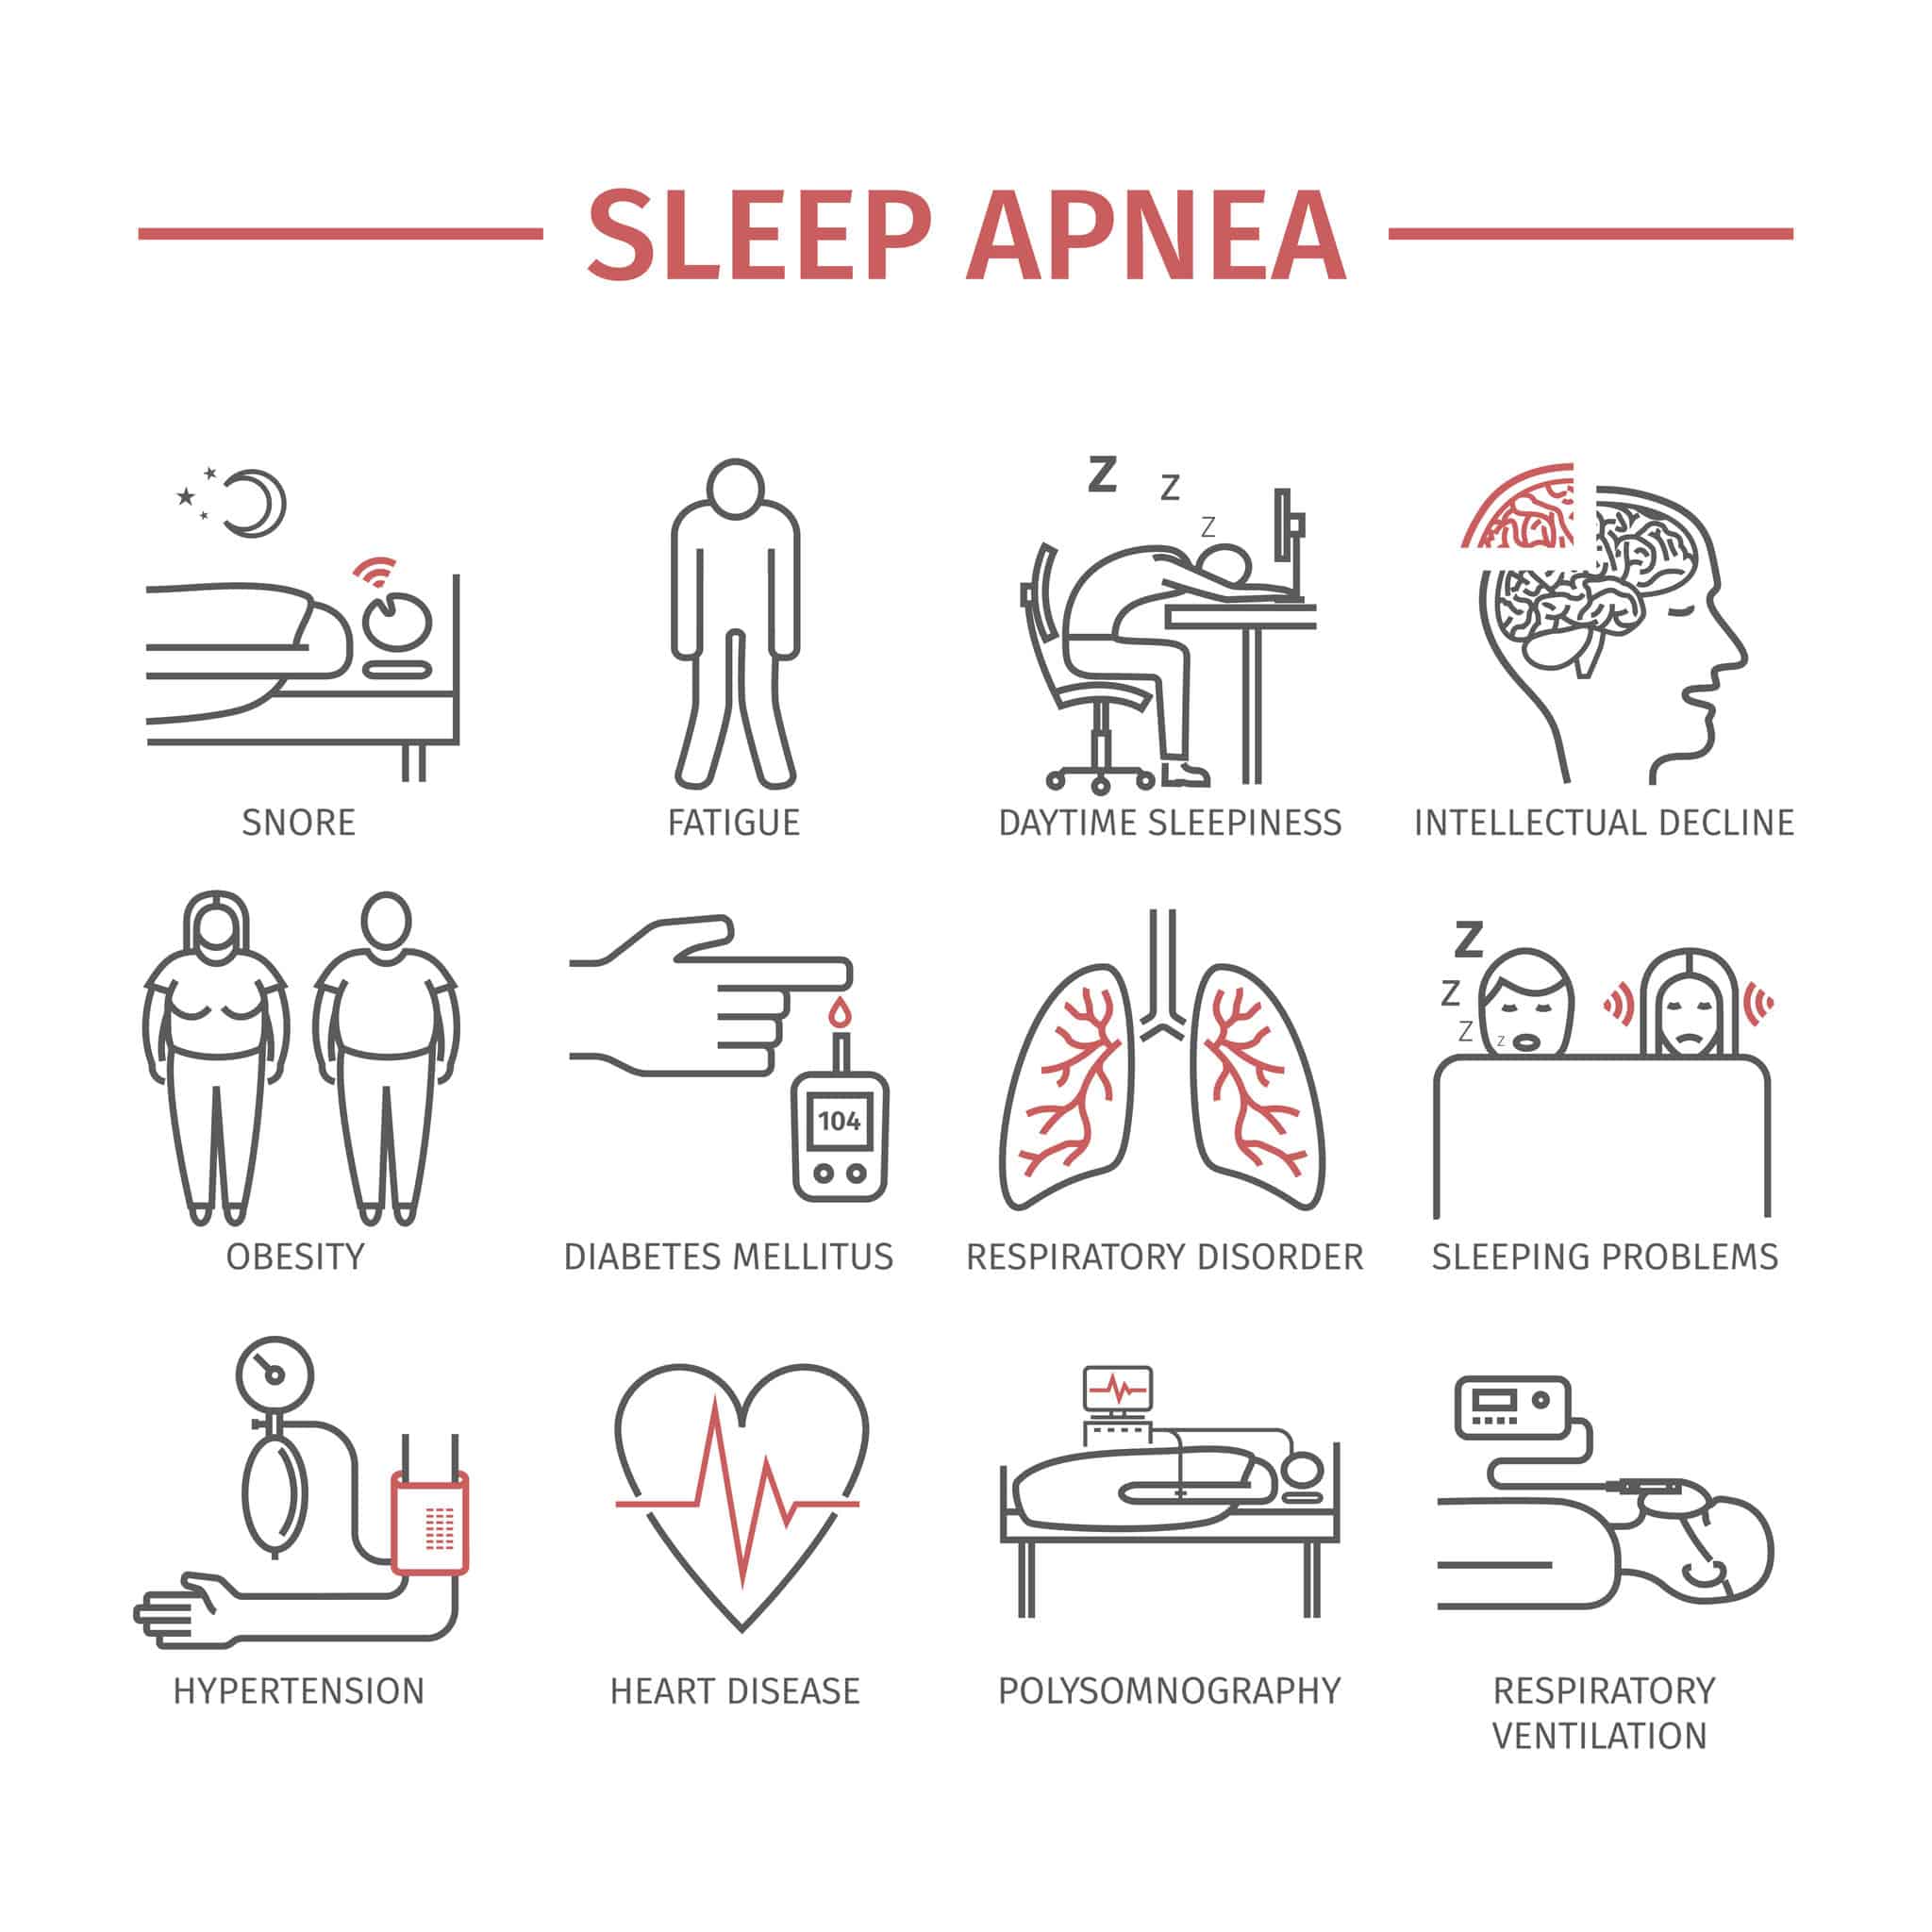 Best Essential Oils To Use For The Treatment Of Sleep Apnea Essential Oil Benefits